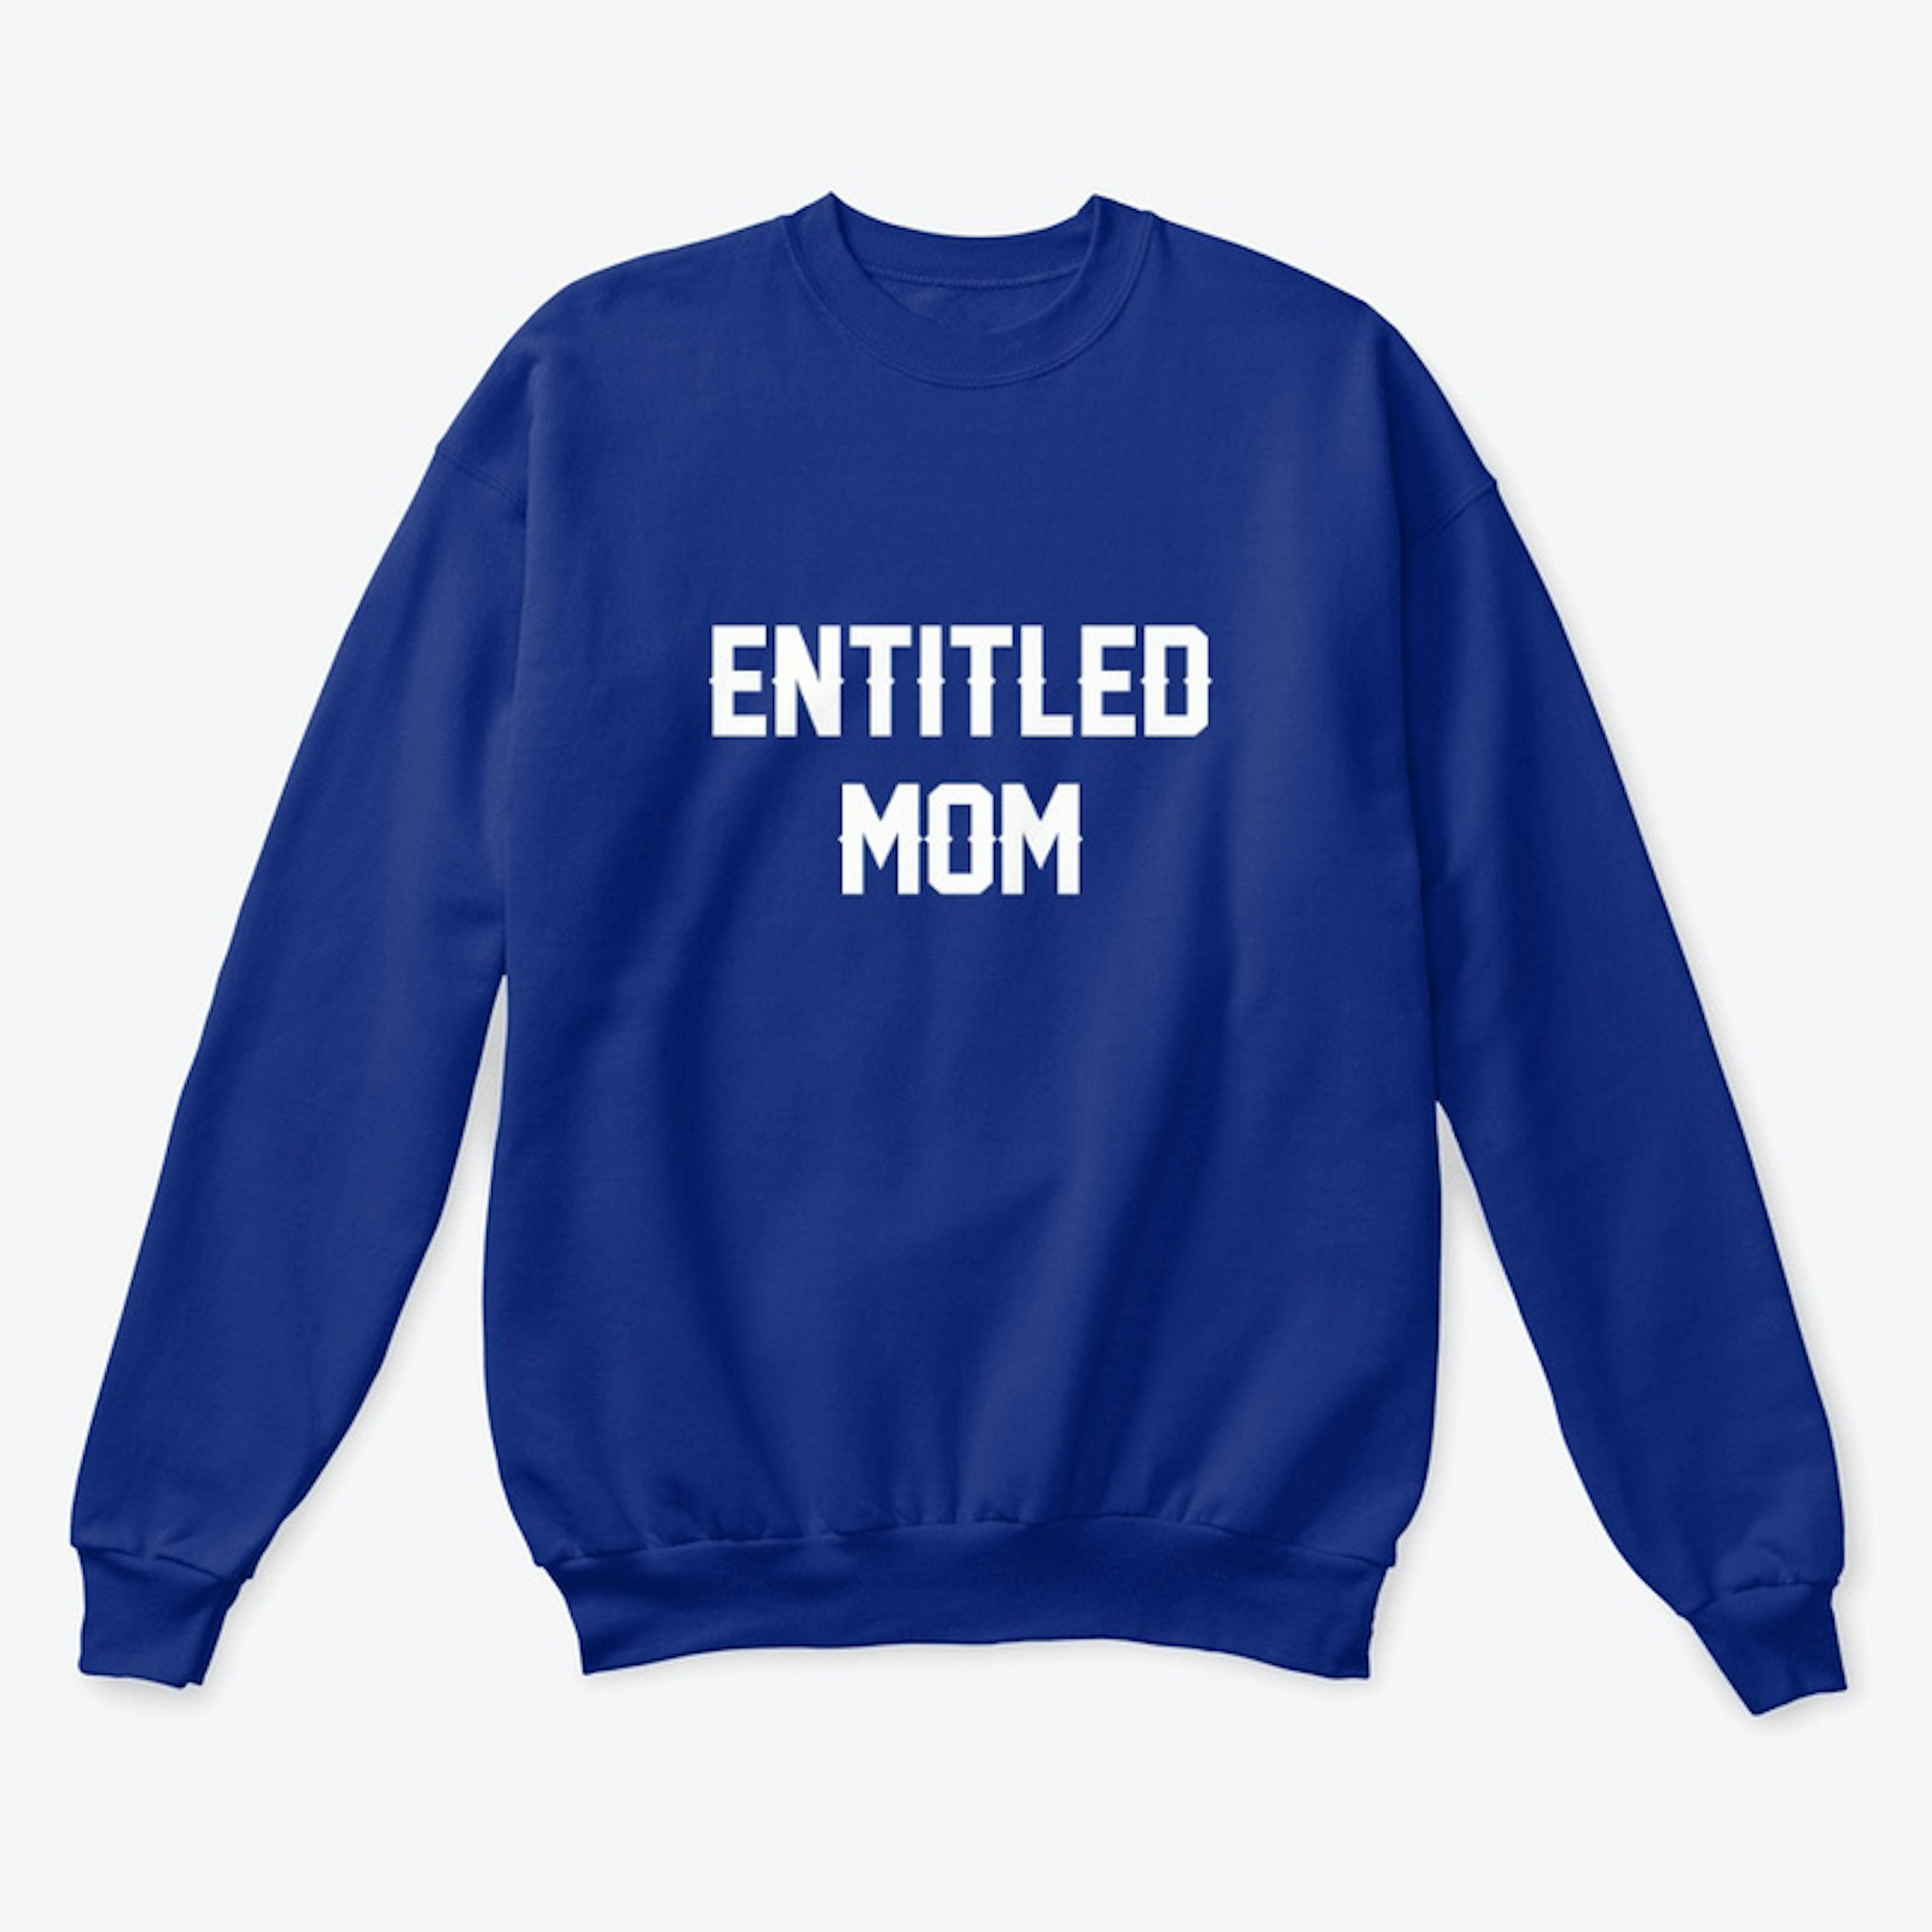 Entitled Mom Products